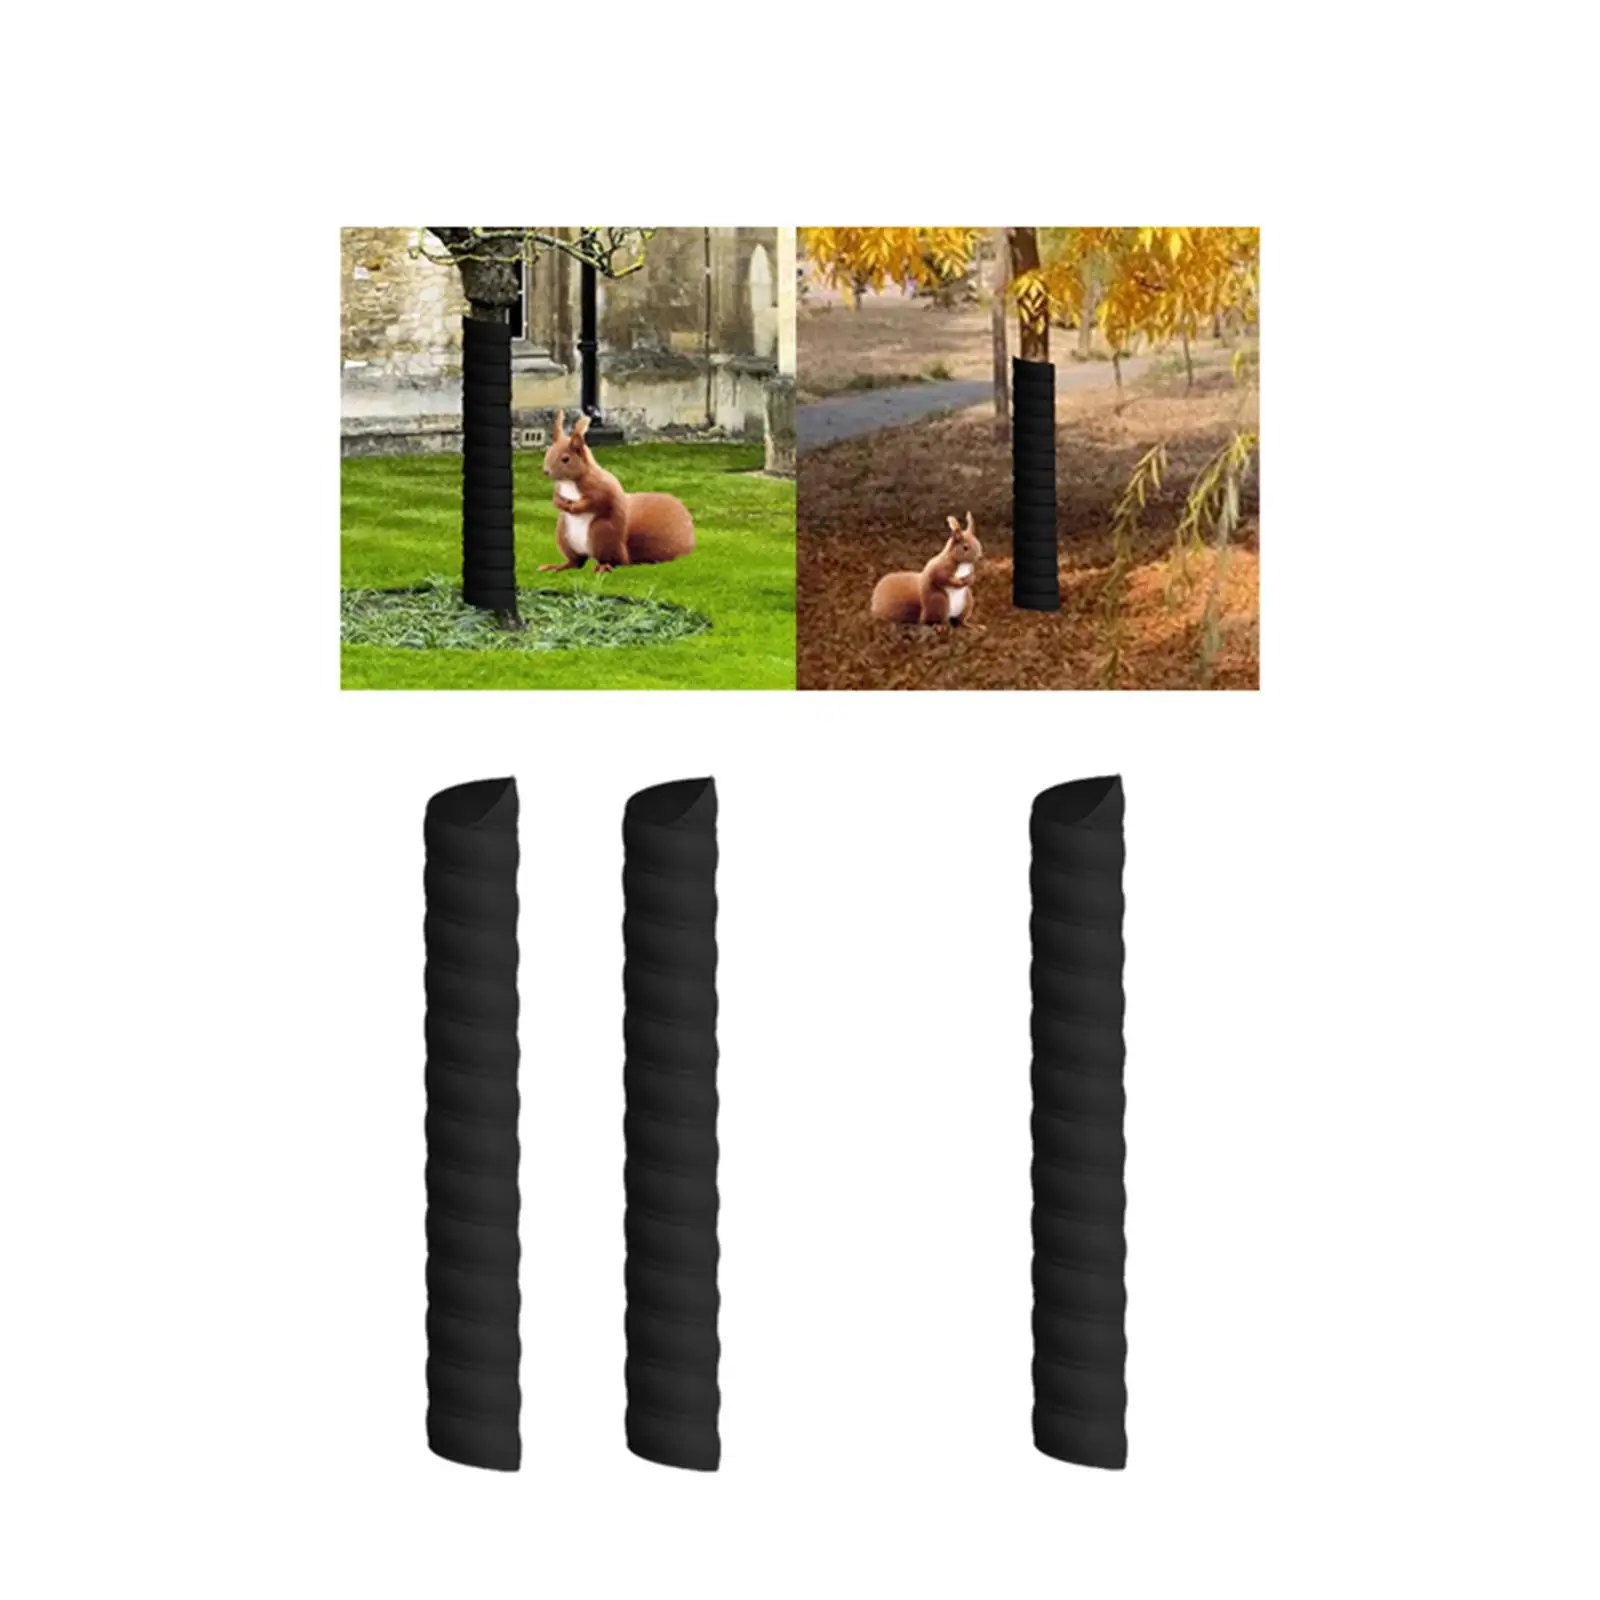 2 Pieces Tree Trunk Protectors Protect Saplings Plants Anti Chewing Scratch Resistant Tree Protection Durable Spiral Tree Guards